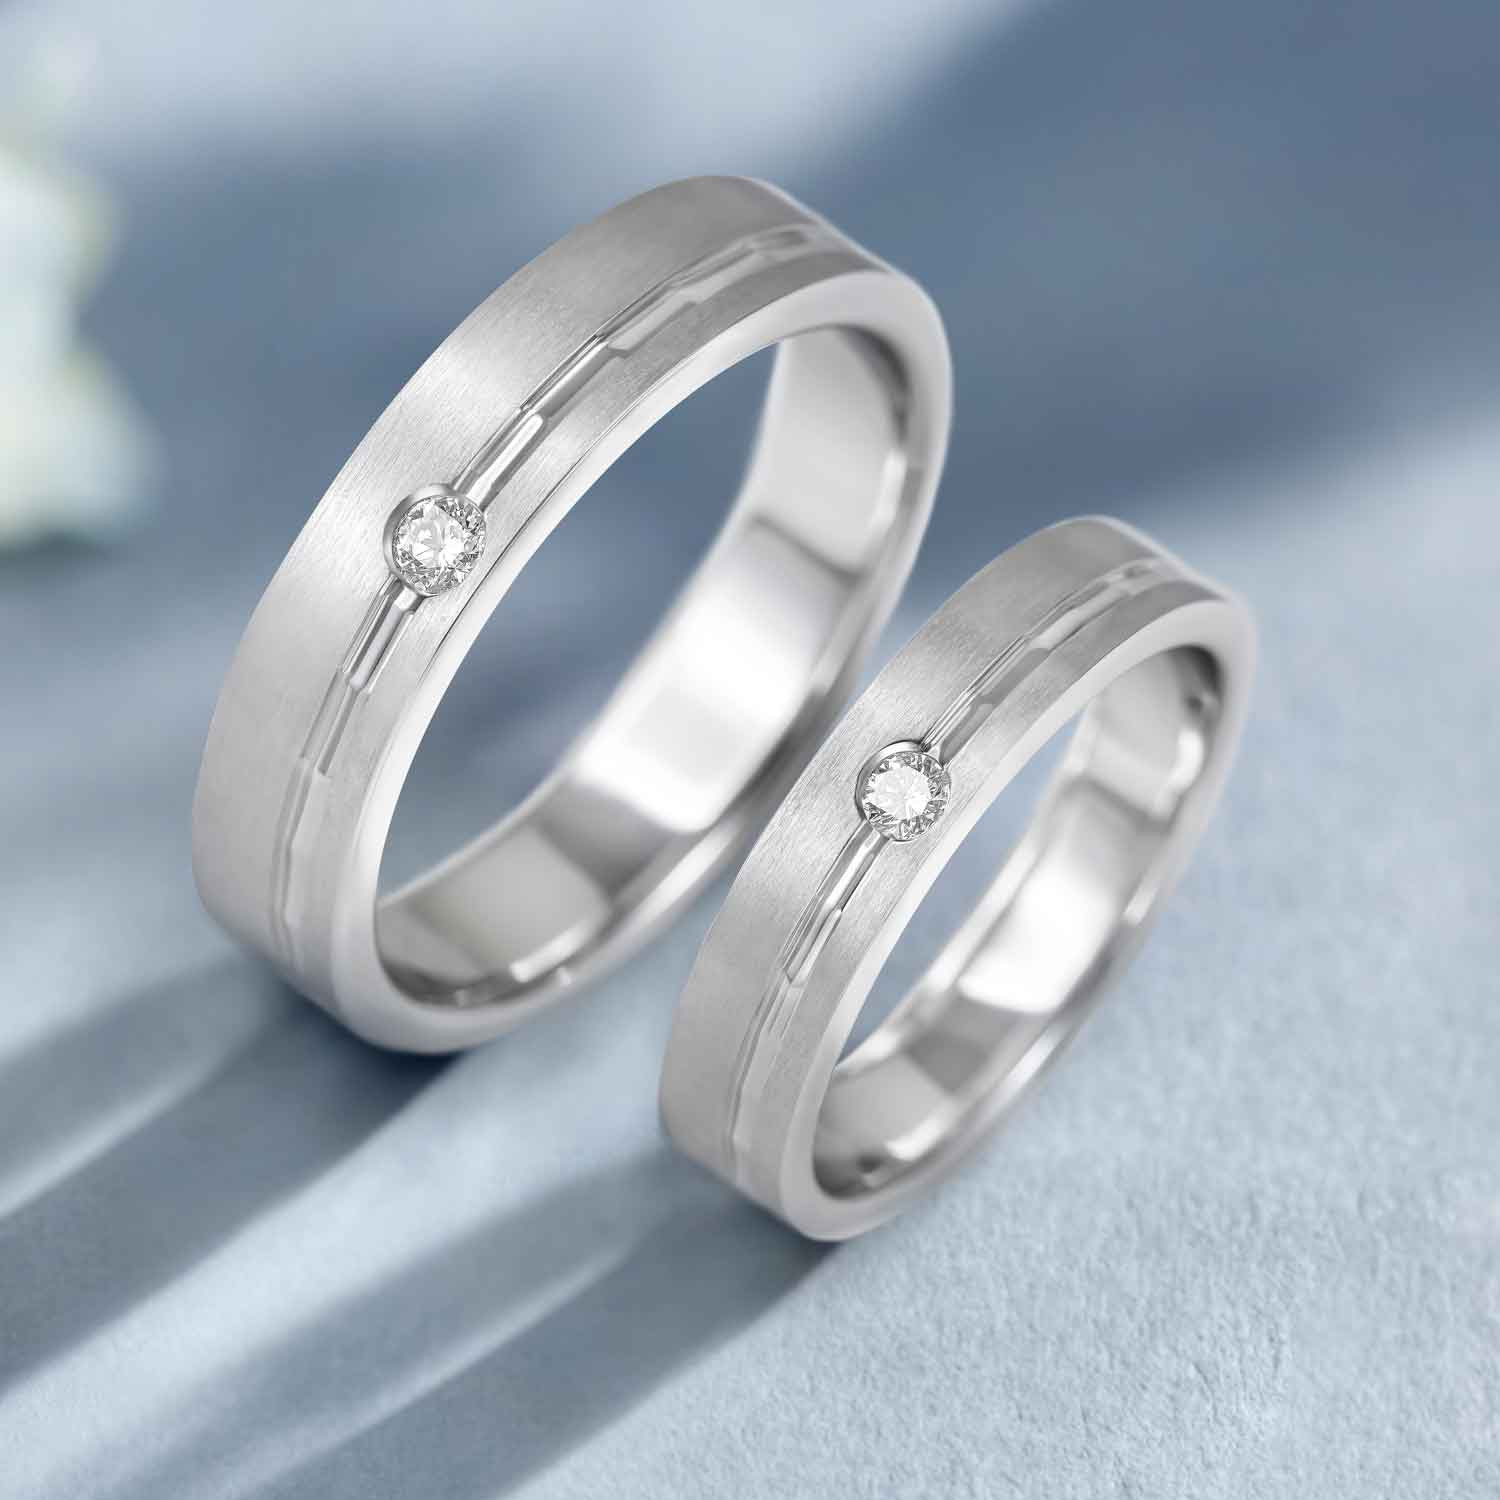 Buy The LoveMark Endearing Couple Ring with Artificial Diamonds lr0004 2024  Online | ZALORA Philippines